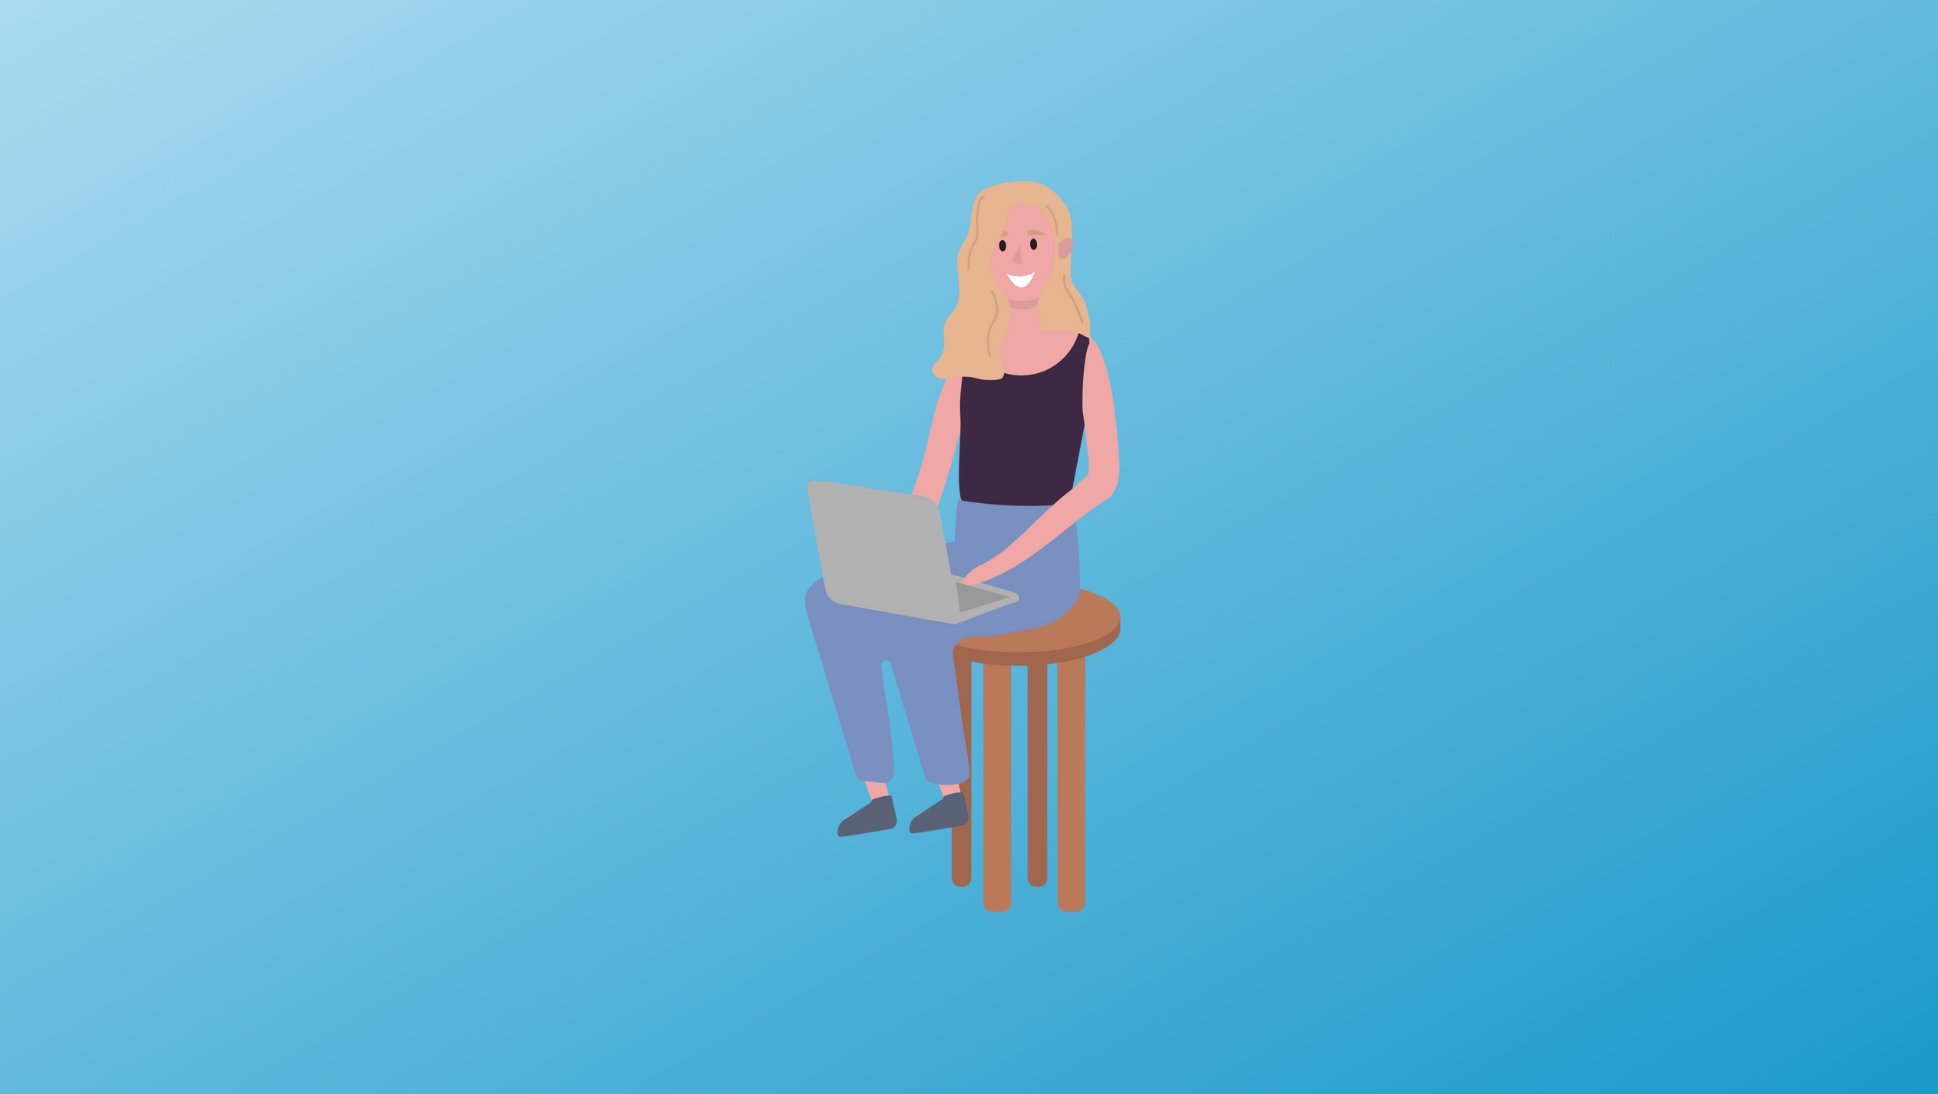 Researching Different Types of Higher Education - illustration of student sitting on stool and working on laptop